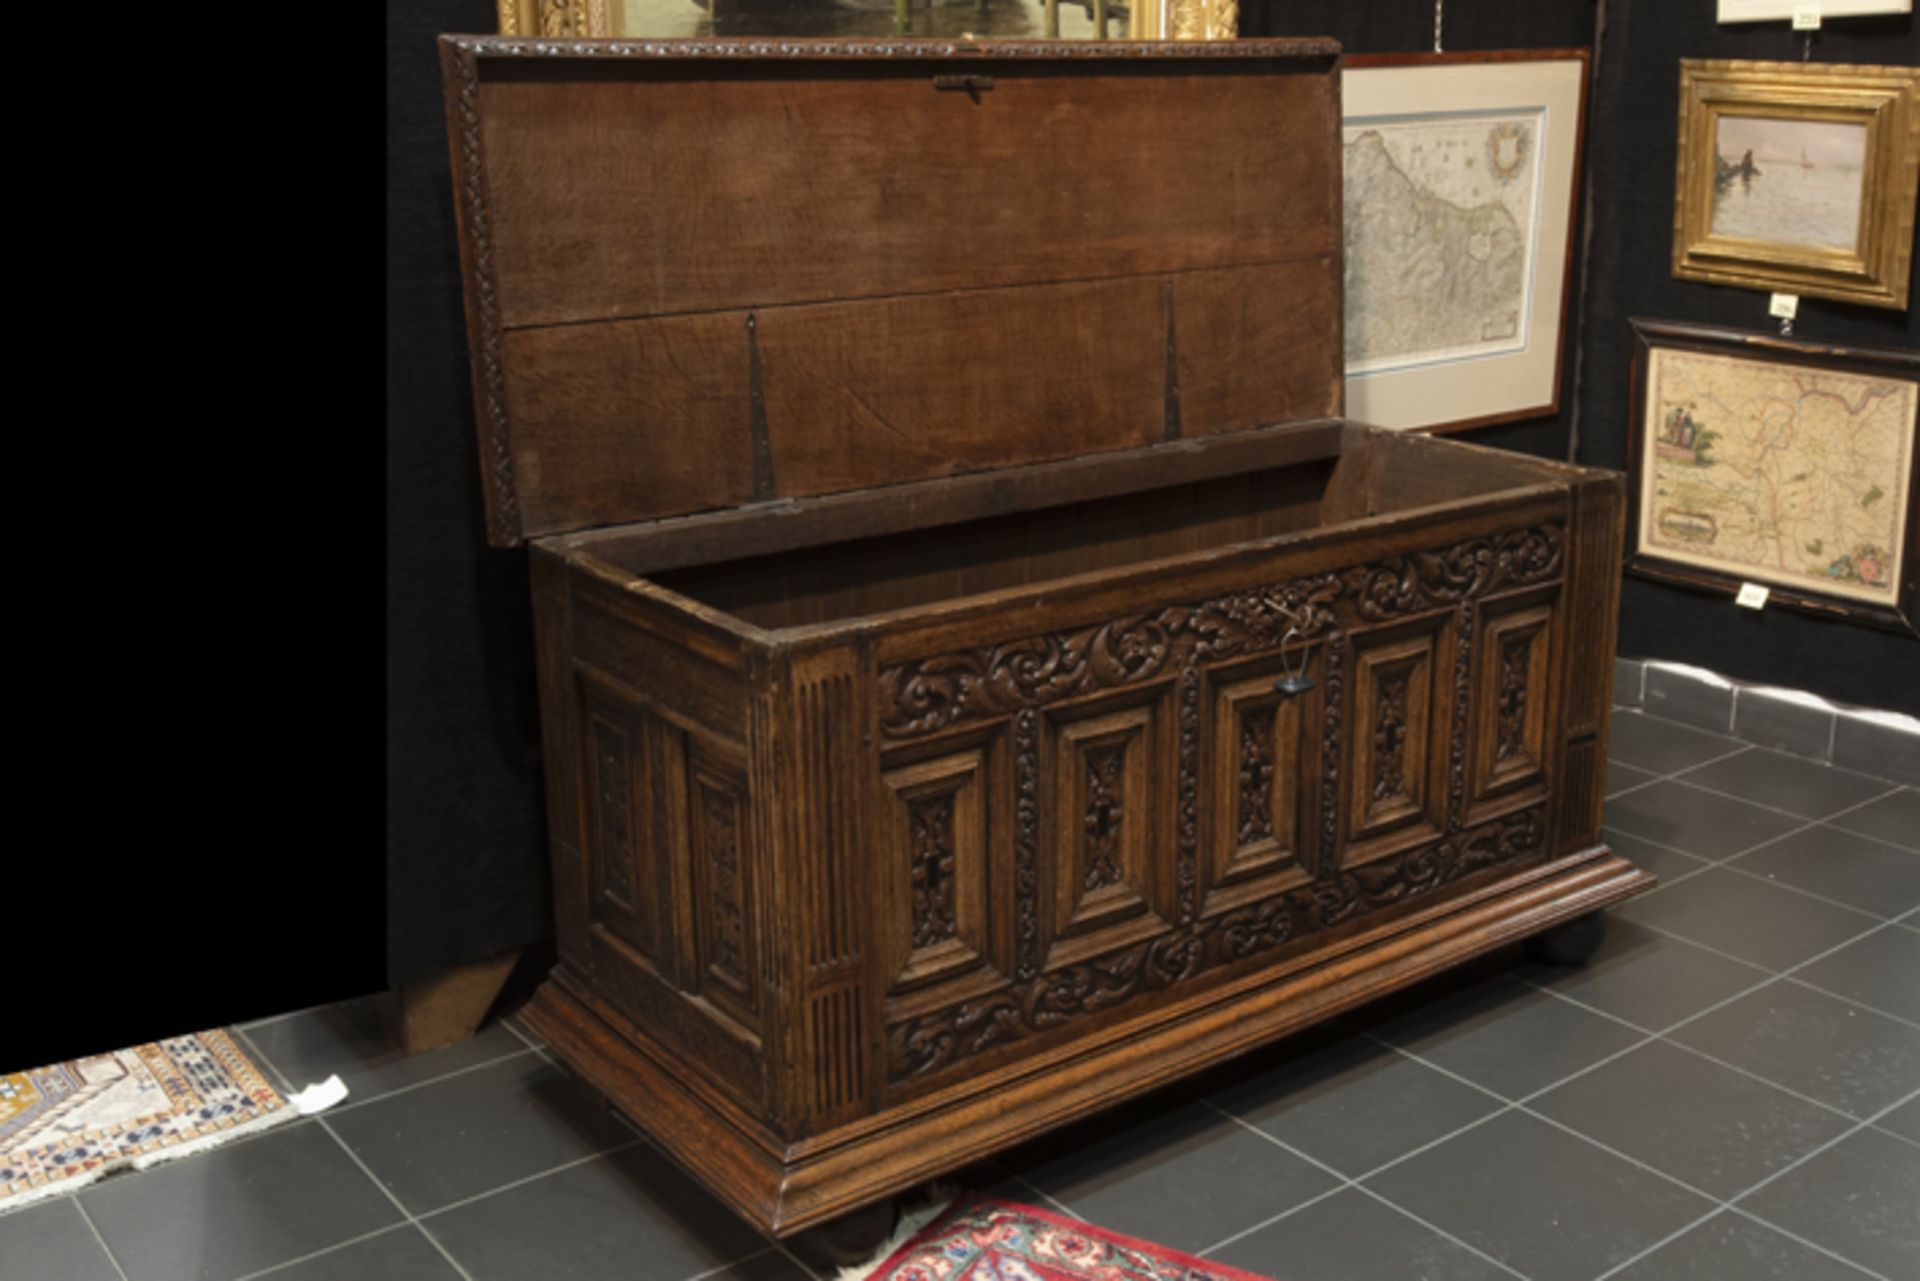 17th Cent. Renaissance style chest in oak and ebony adorned with finely sculpted panels - Bild 2 aus 3